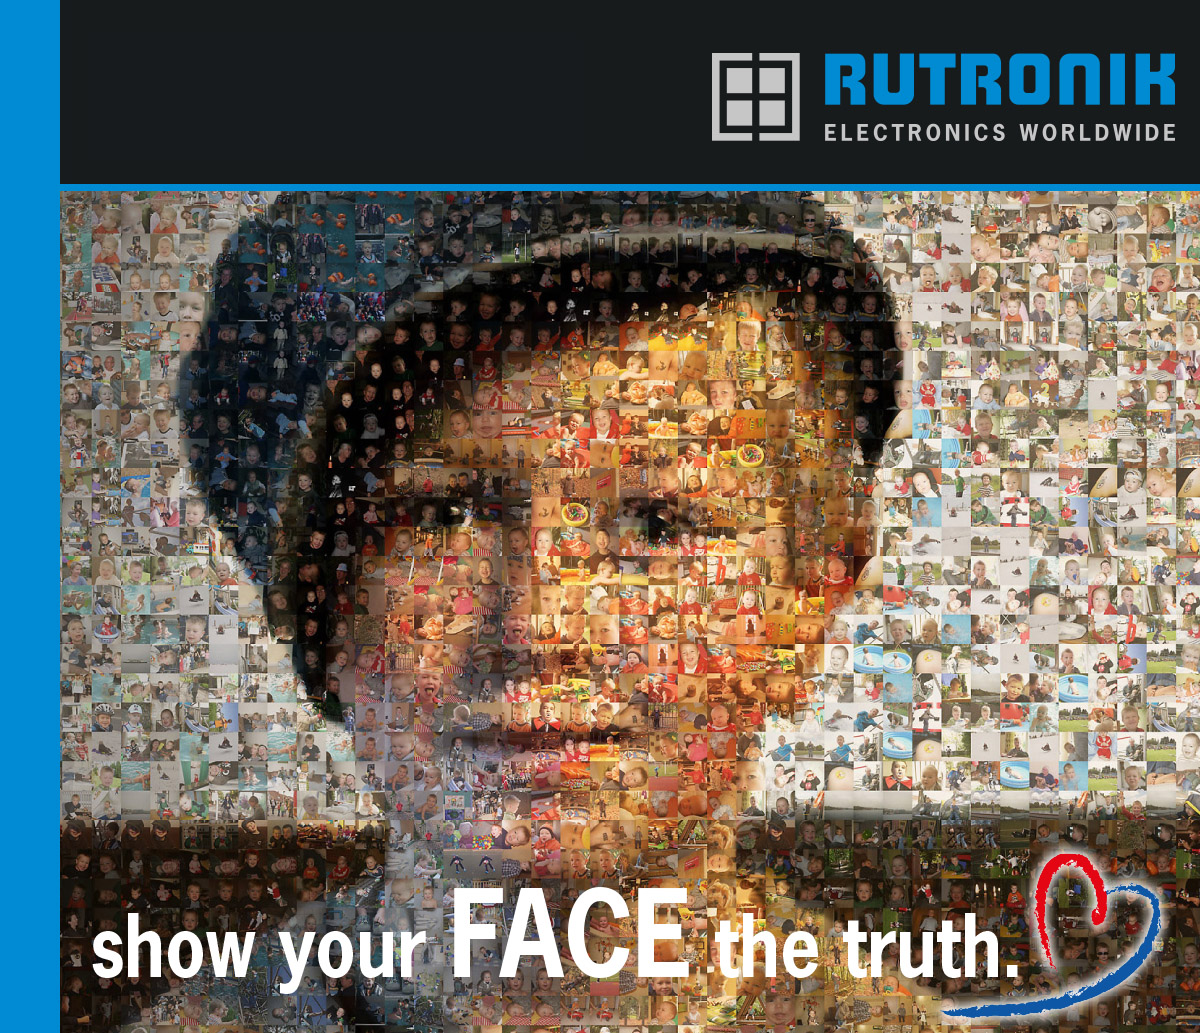 Rutronik Distribution. Art Car.: The campaign “show your FACE the truth” enables everyone to become part of the work of art.